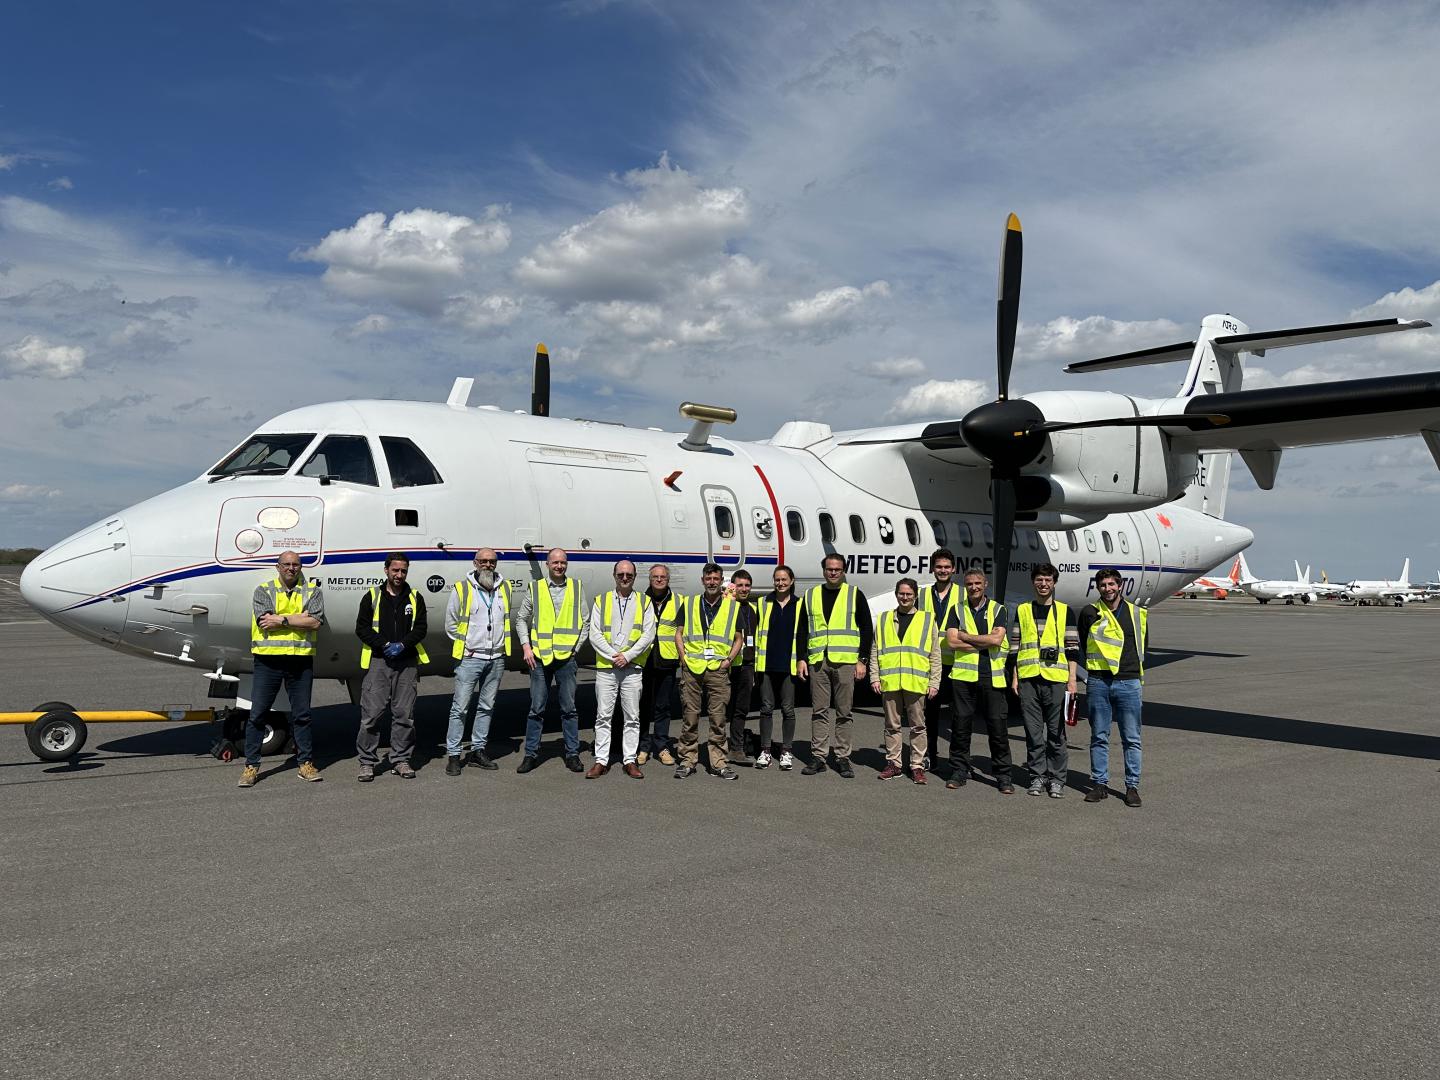 SENS4ICE European flight campaign team at Francazal airport after completing successful natural icing measurement flight with specially equipped Safire ATR 42 aircraft (copyright Safire).